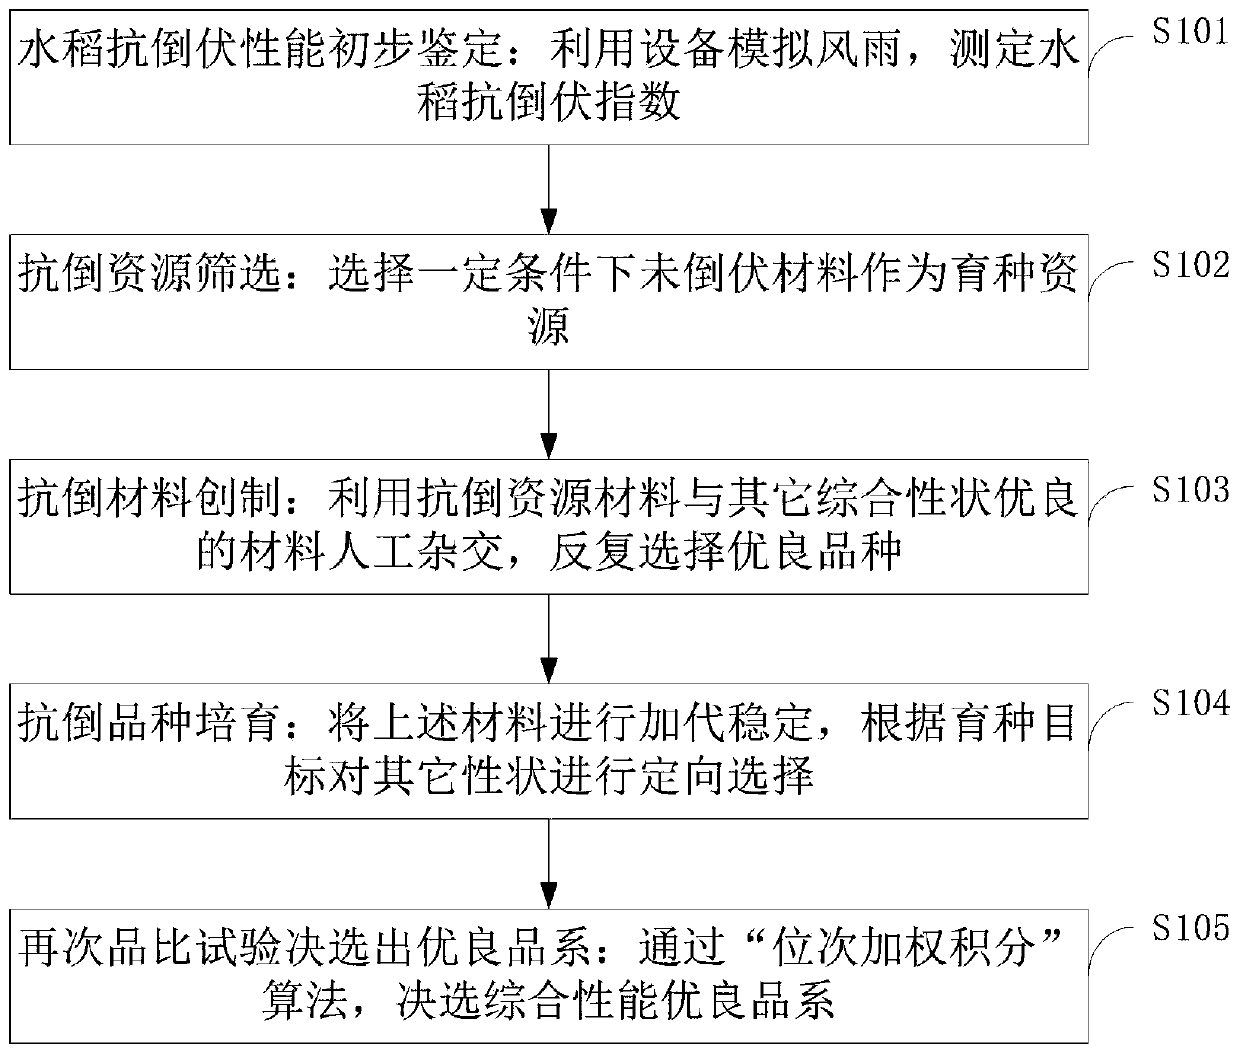 Method for assisting rice breeding by using lodging-resistant index